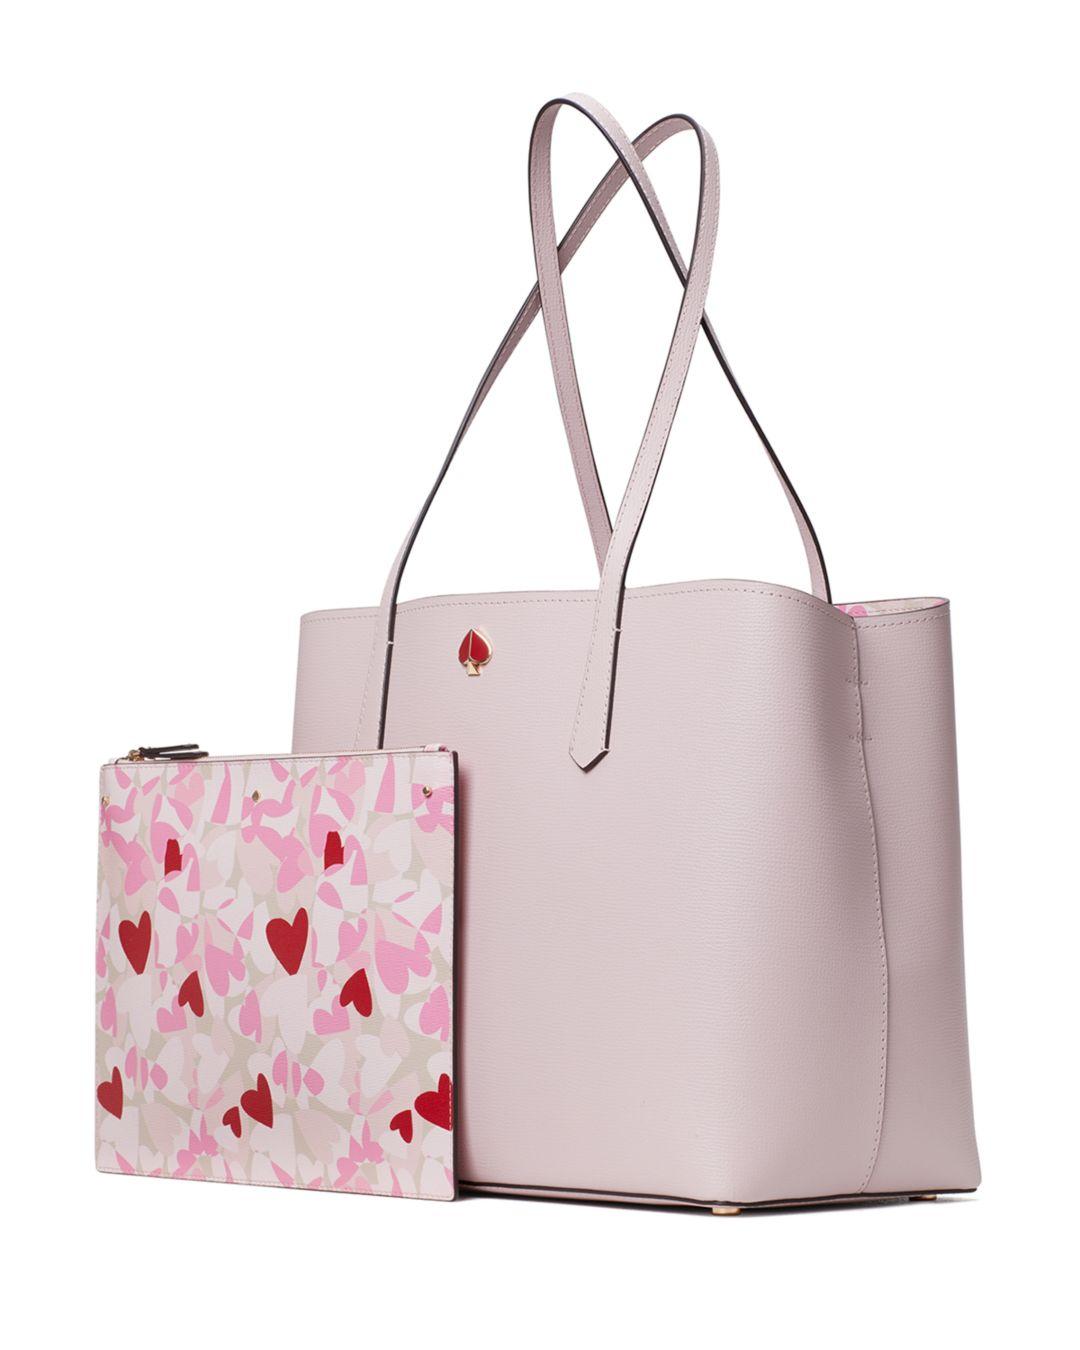 Molly Ever Fallen Small Tote Kate Spade New York | lupon.gov.ph